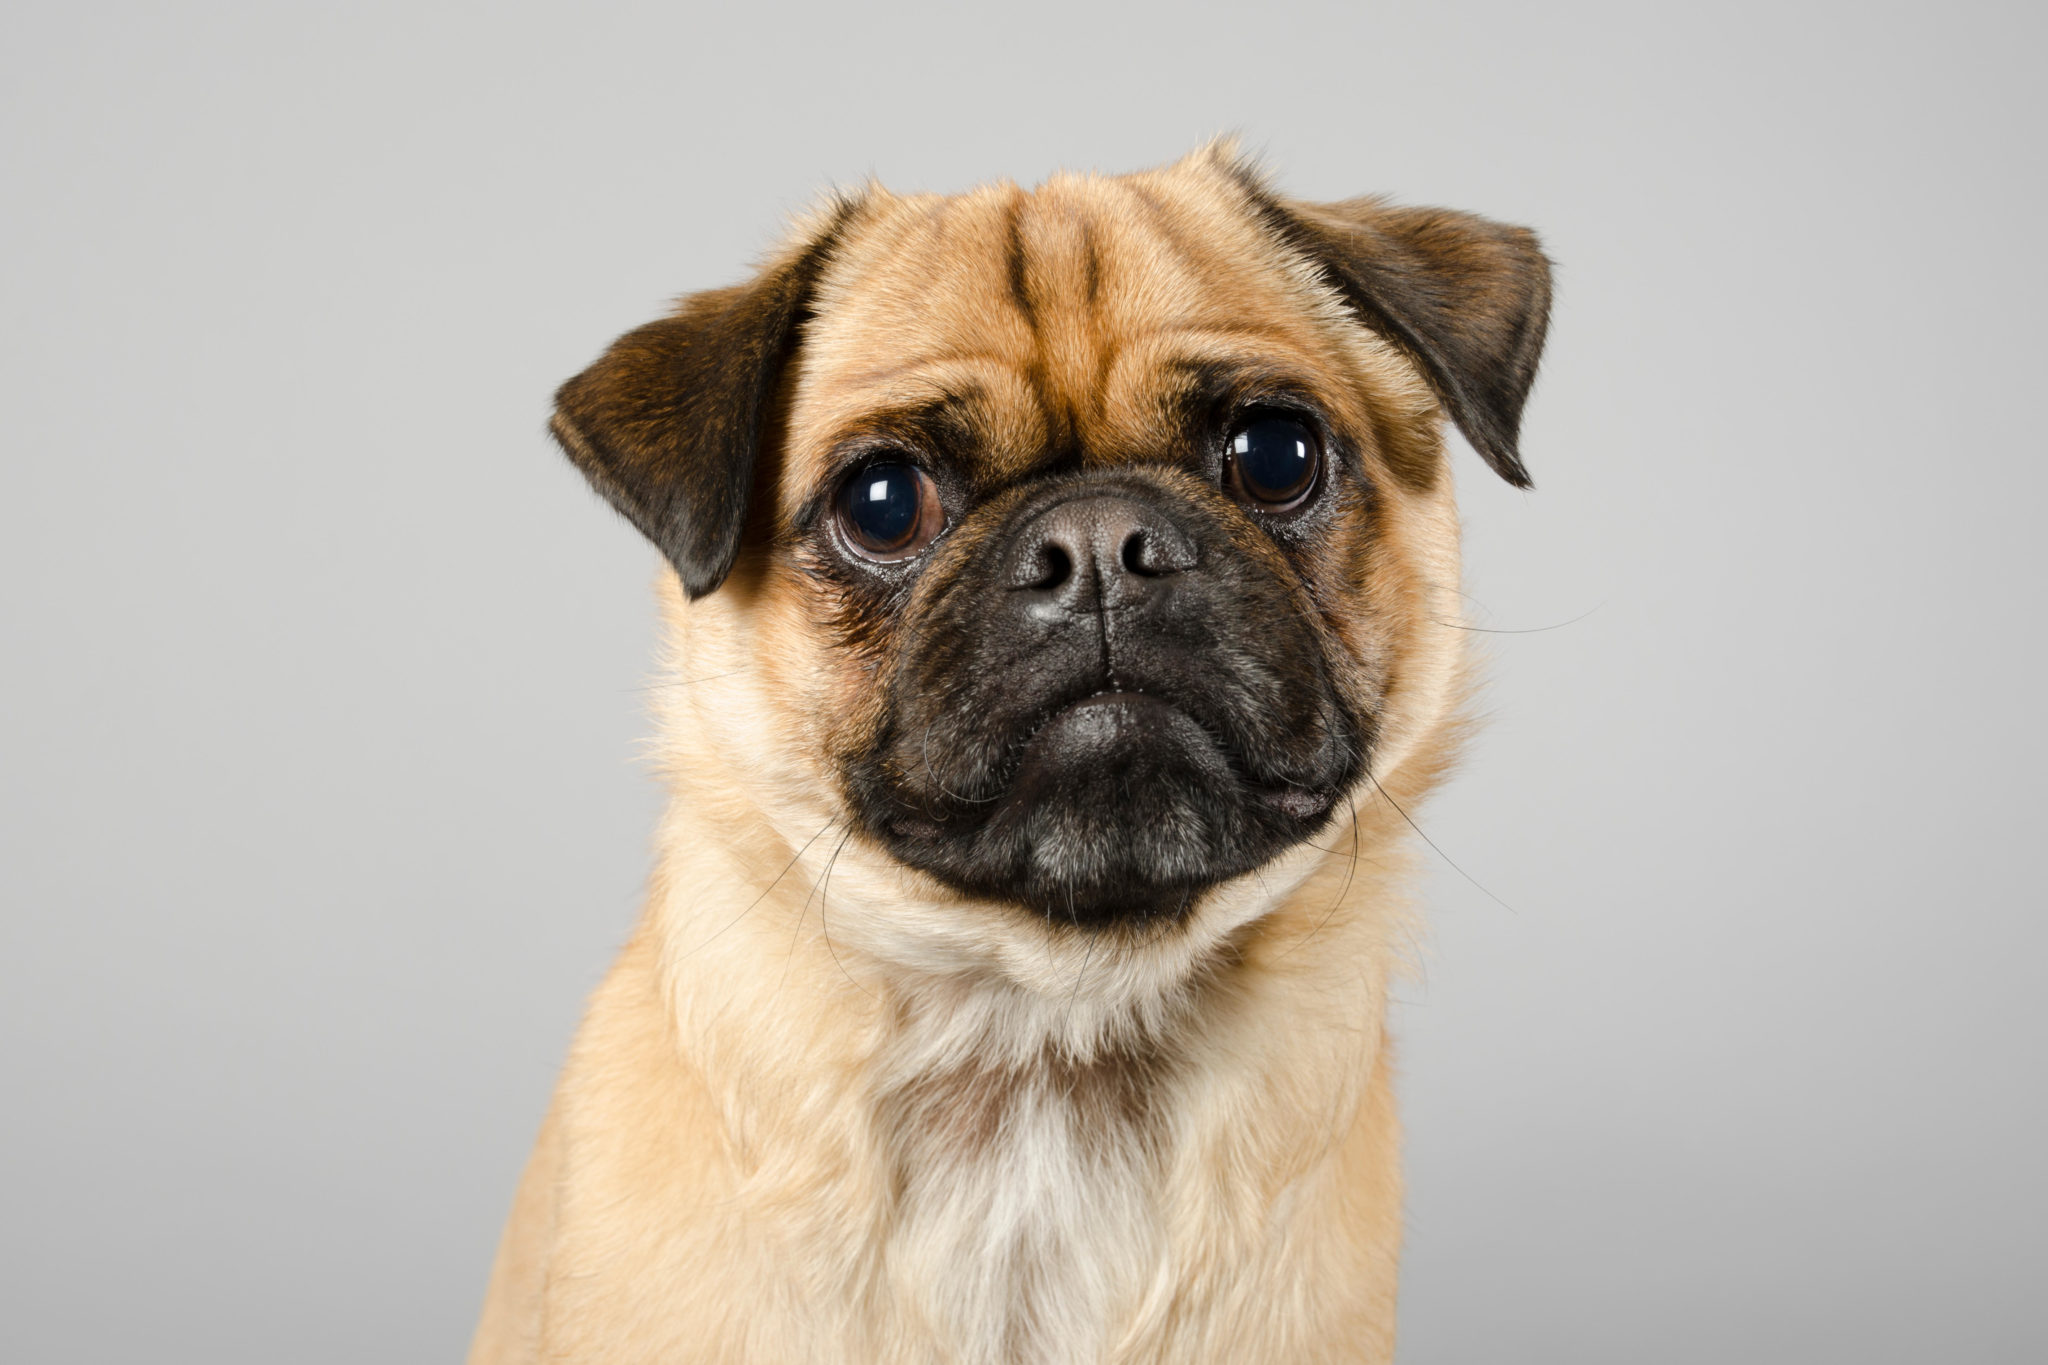 A Pug crossbreed dog in the UK.